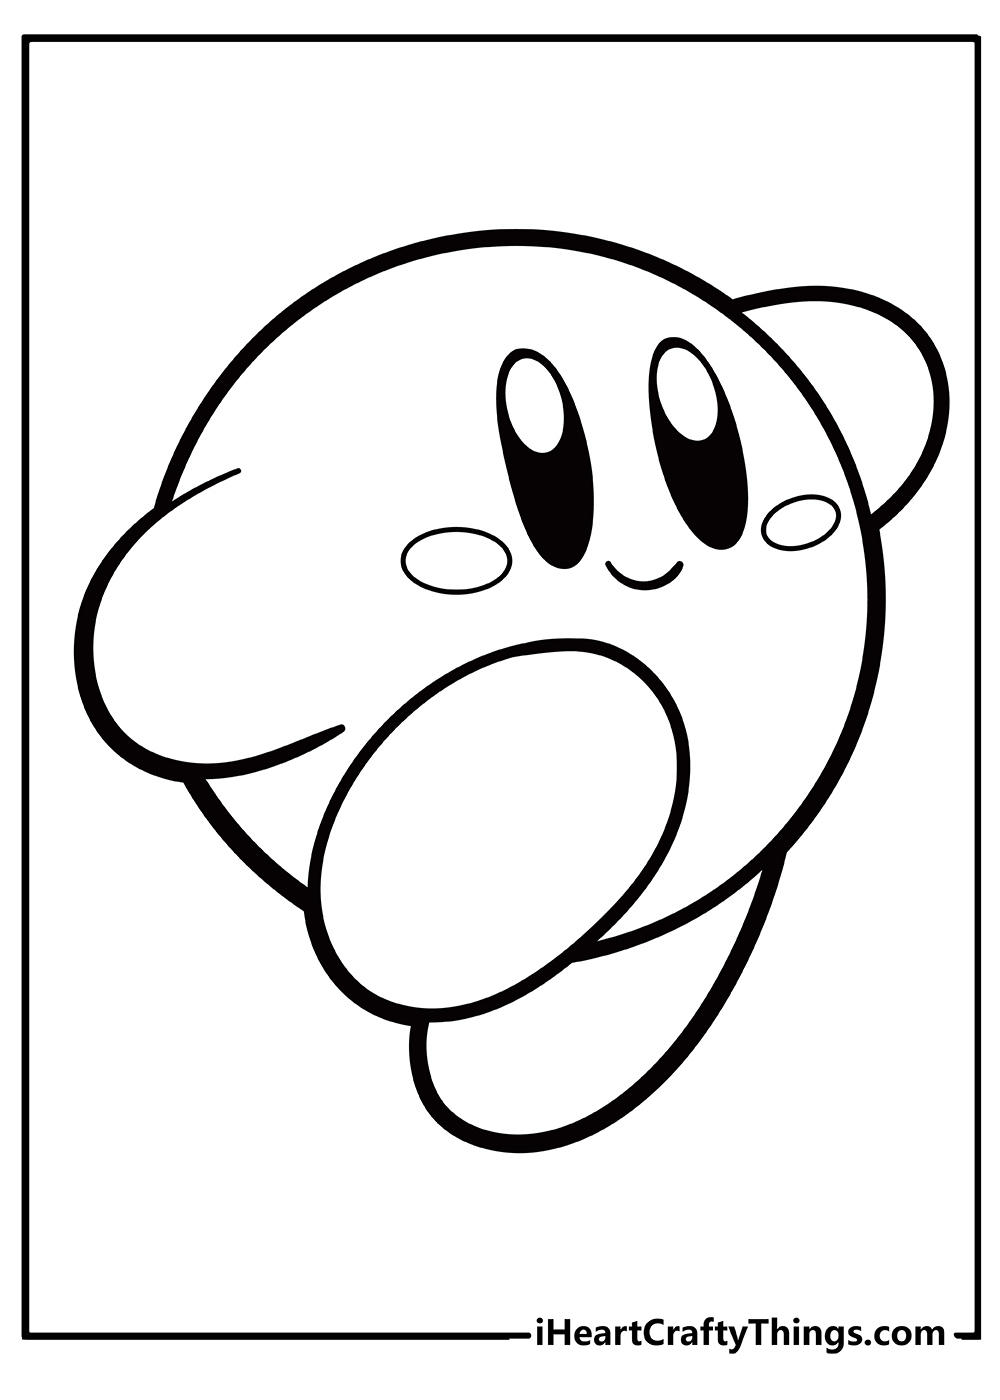 Kirby Coloring Sheet for children free download